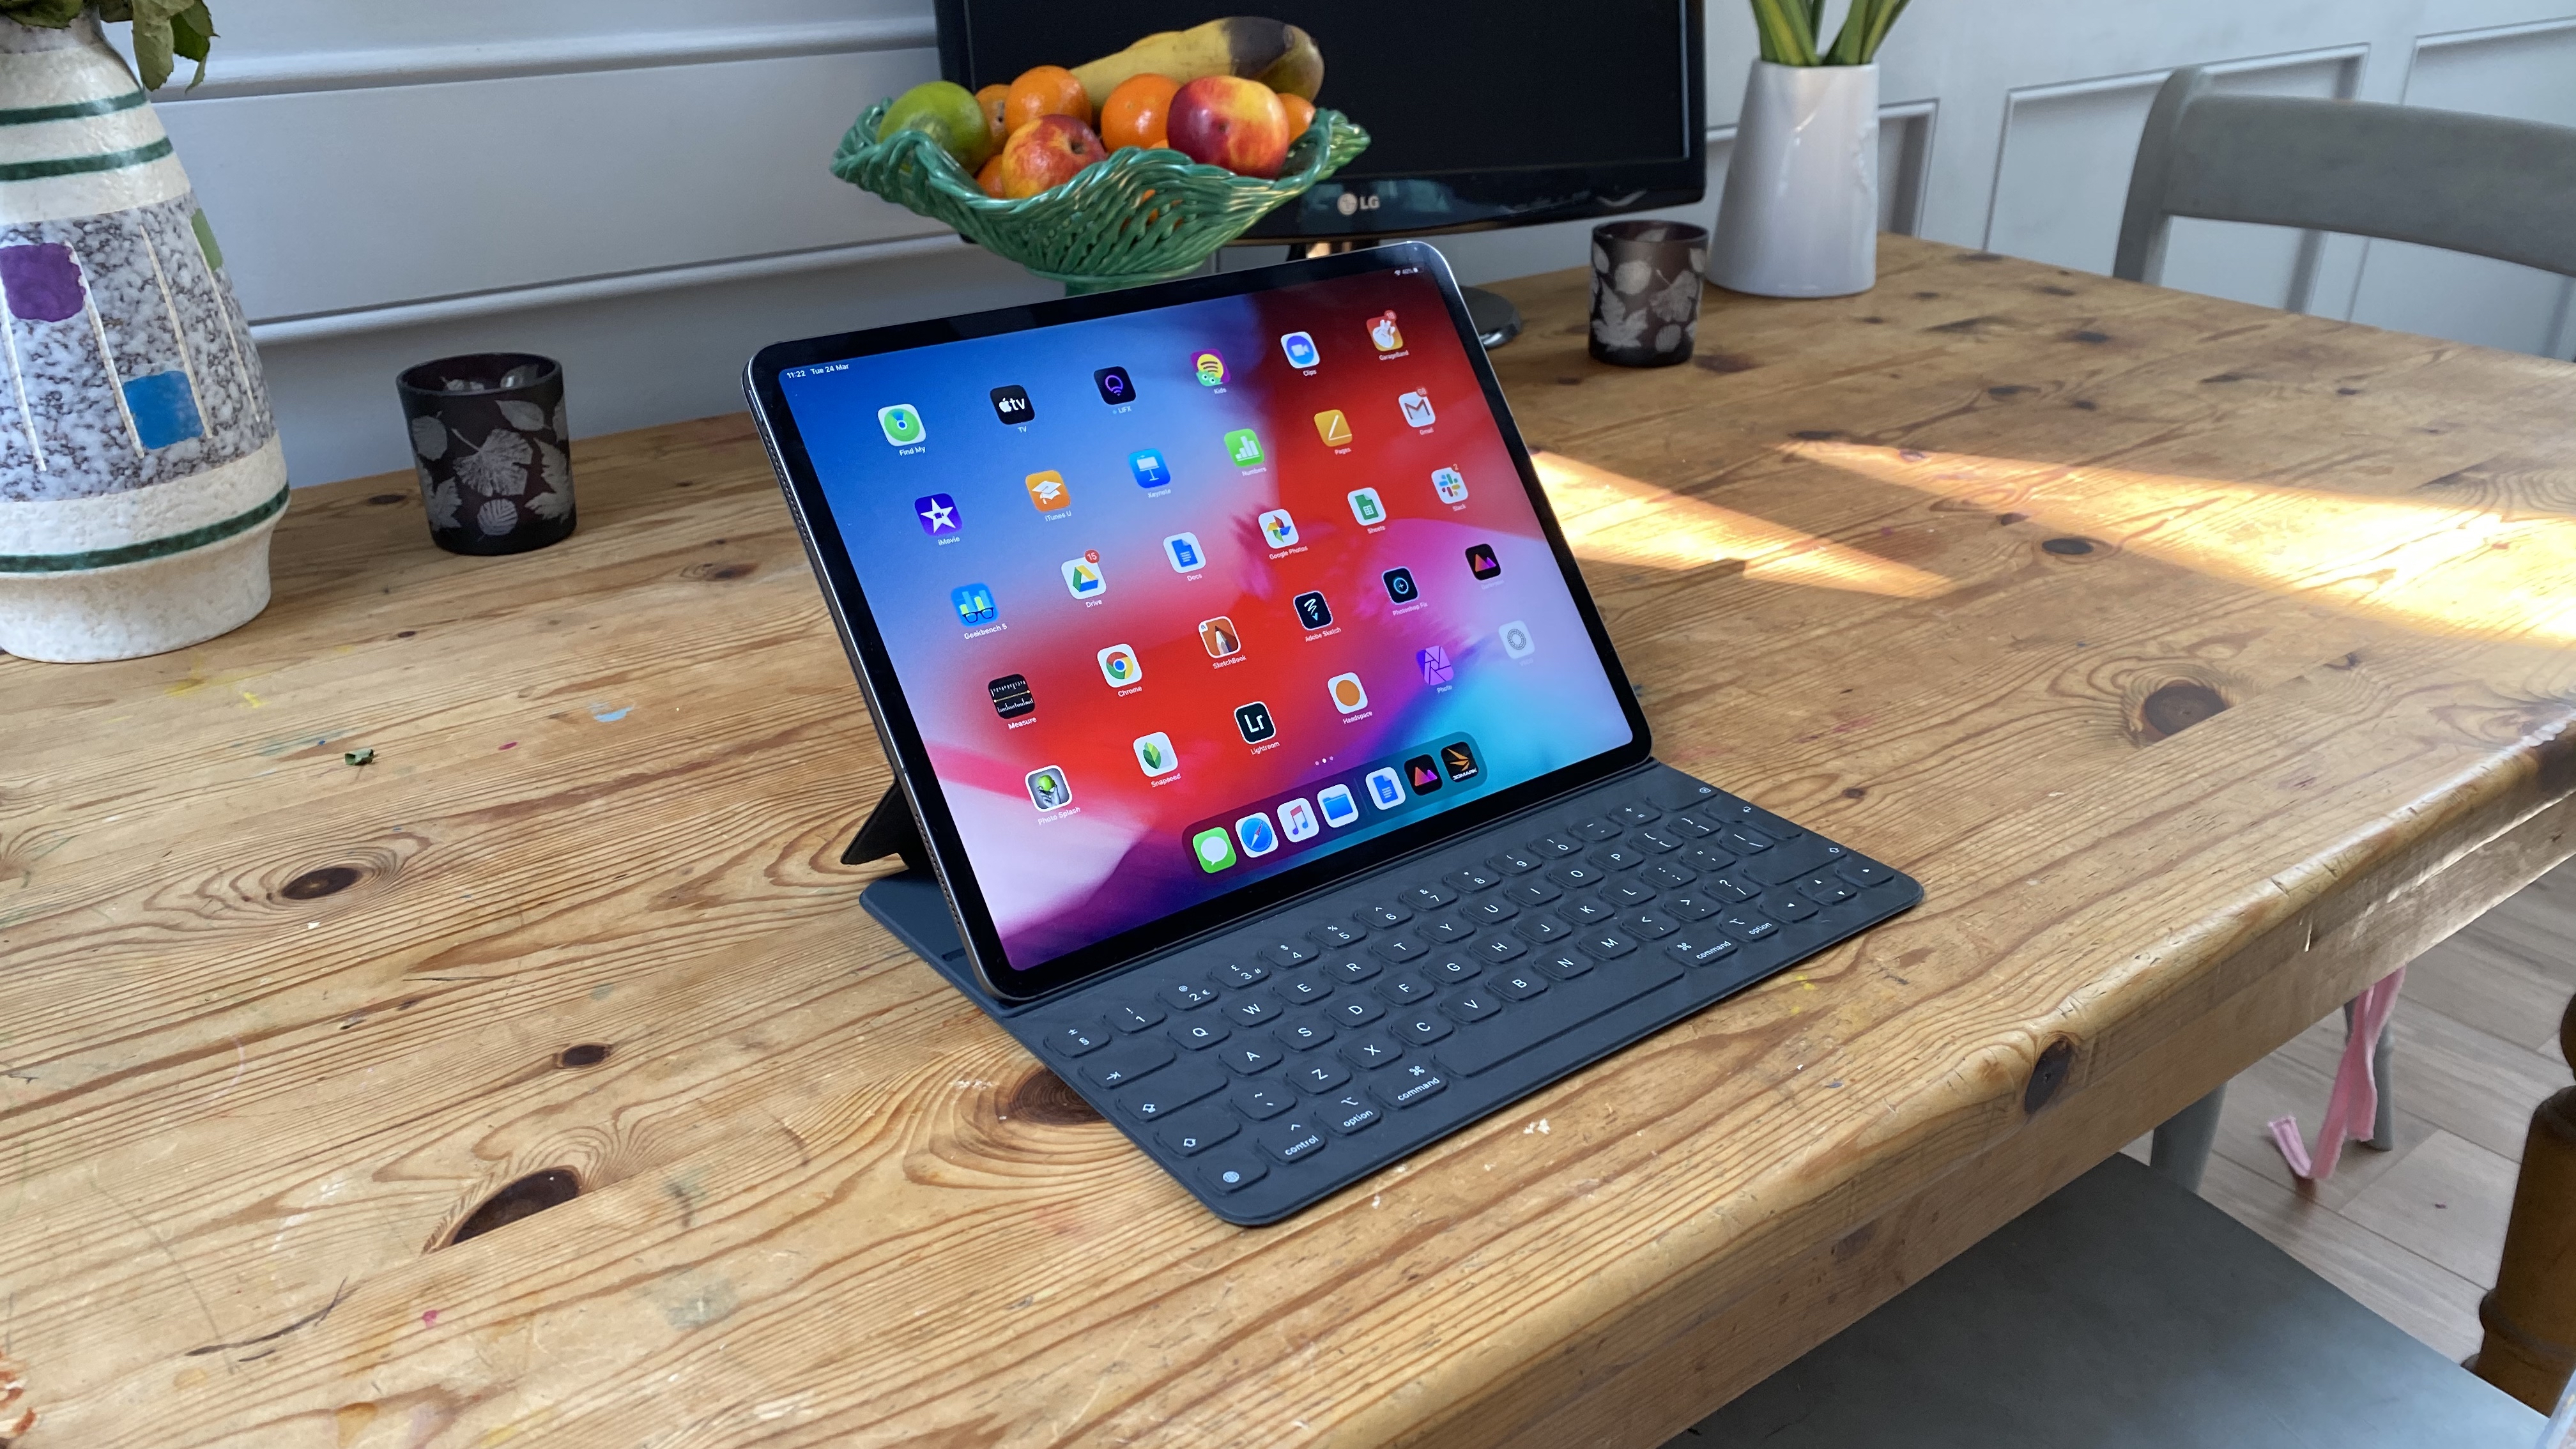 Best Ipad Keyboard 2021 Looks like Apple's already planning changes for the iPad Pro's 